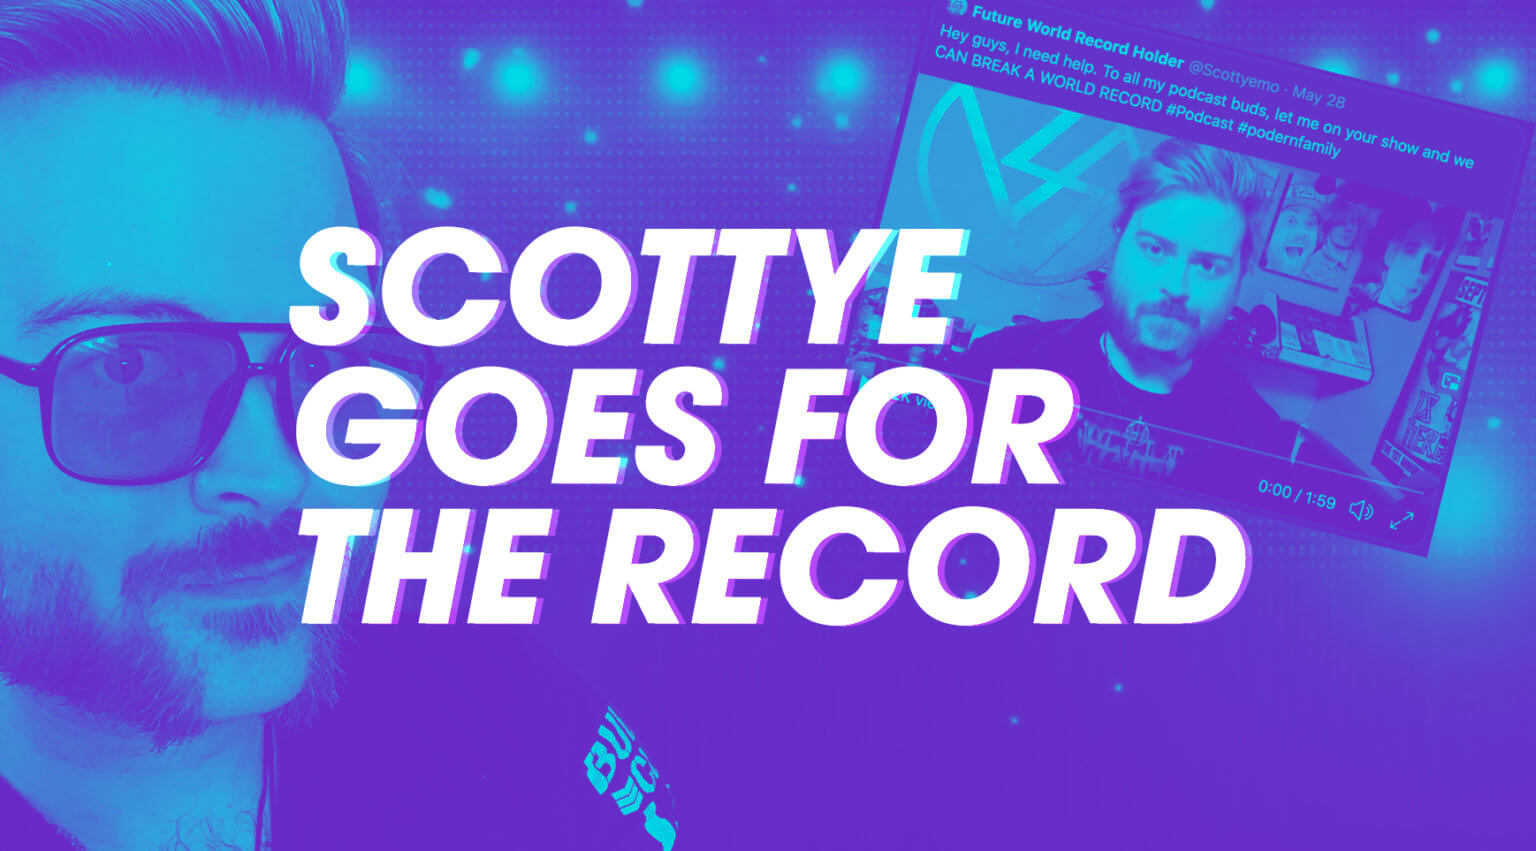 Scottye Moore is Trying to Break a Podcast World Record